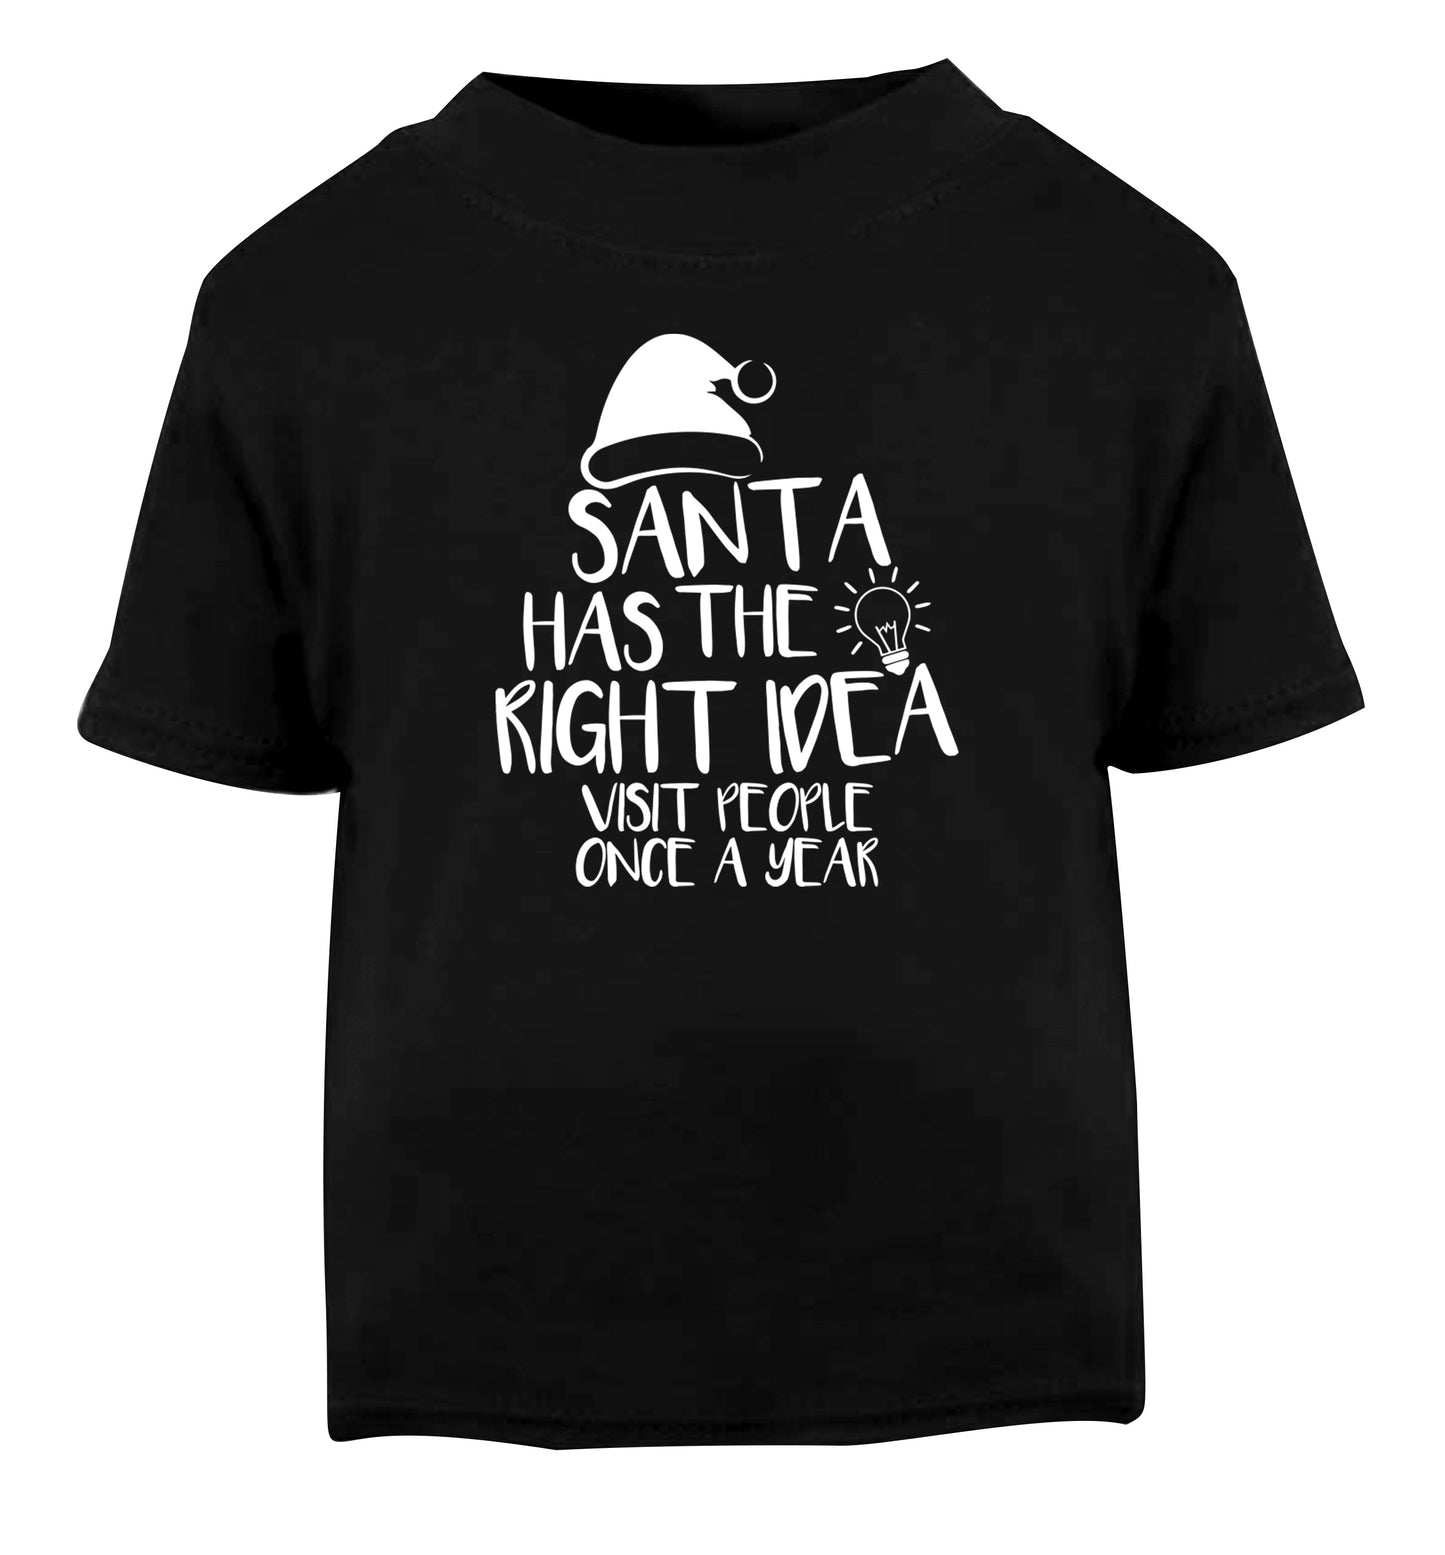 Santa has the right idea visit people once a year Black Baby Toddler Tshirt 2 years